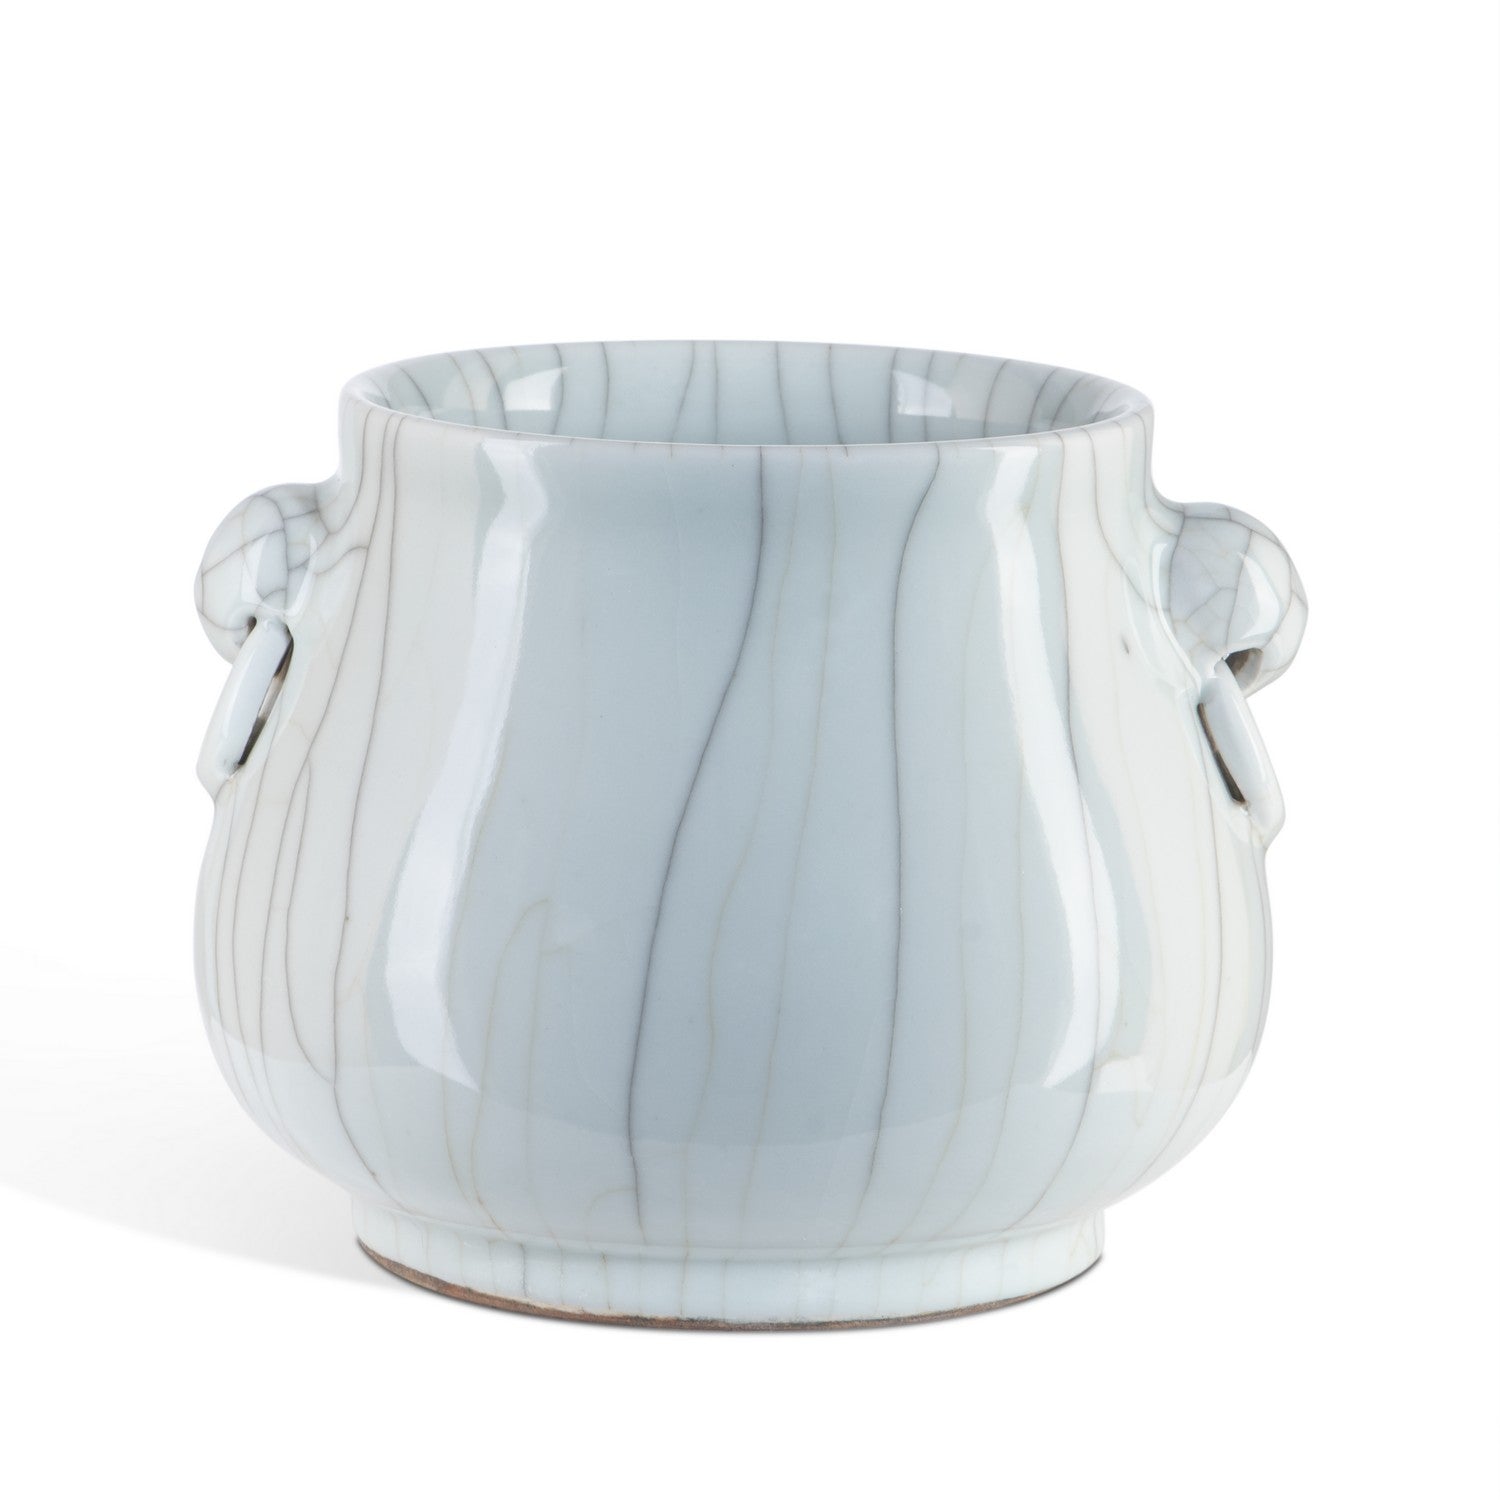 Currey and Company - 1200-0692 - Planter - Celadon Crackle